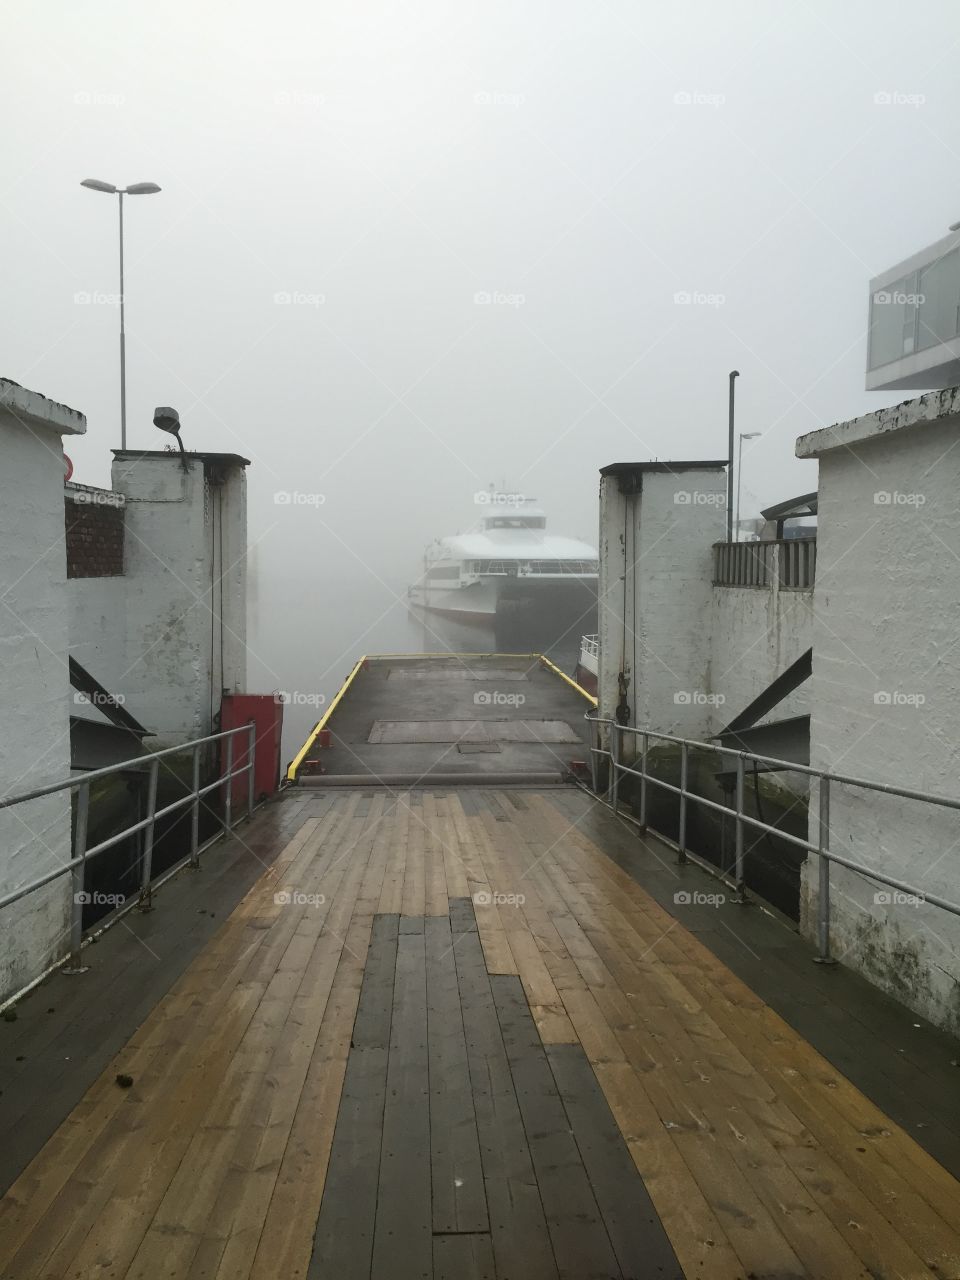 A very foggy day in Tromso, Norway. 